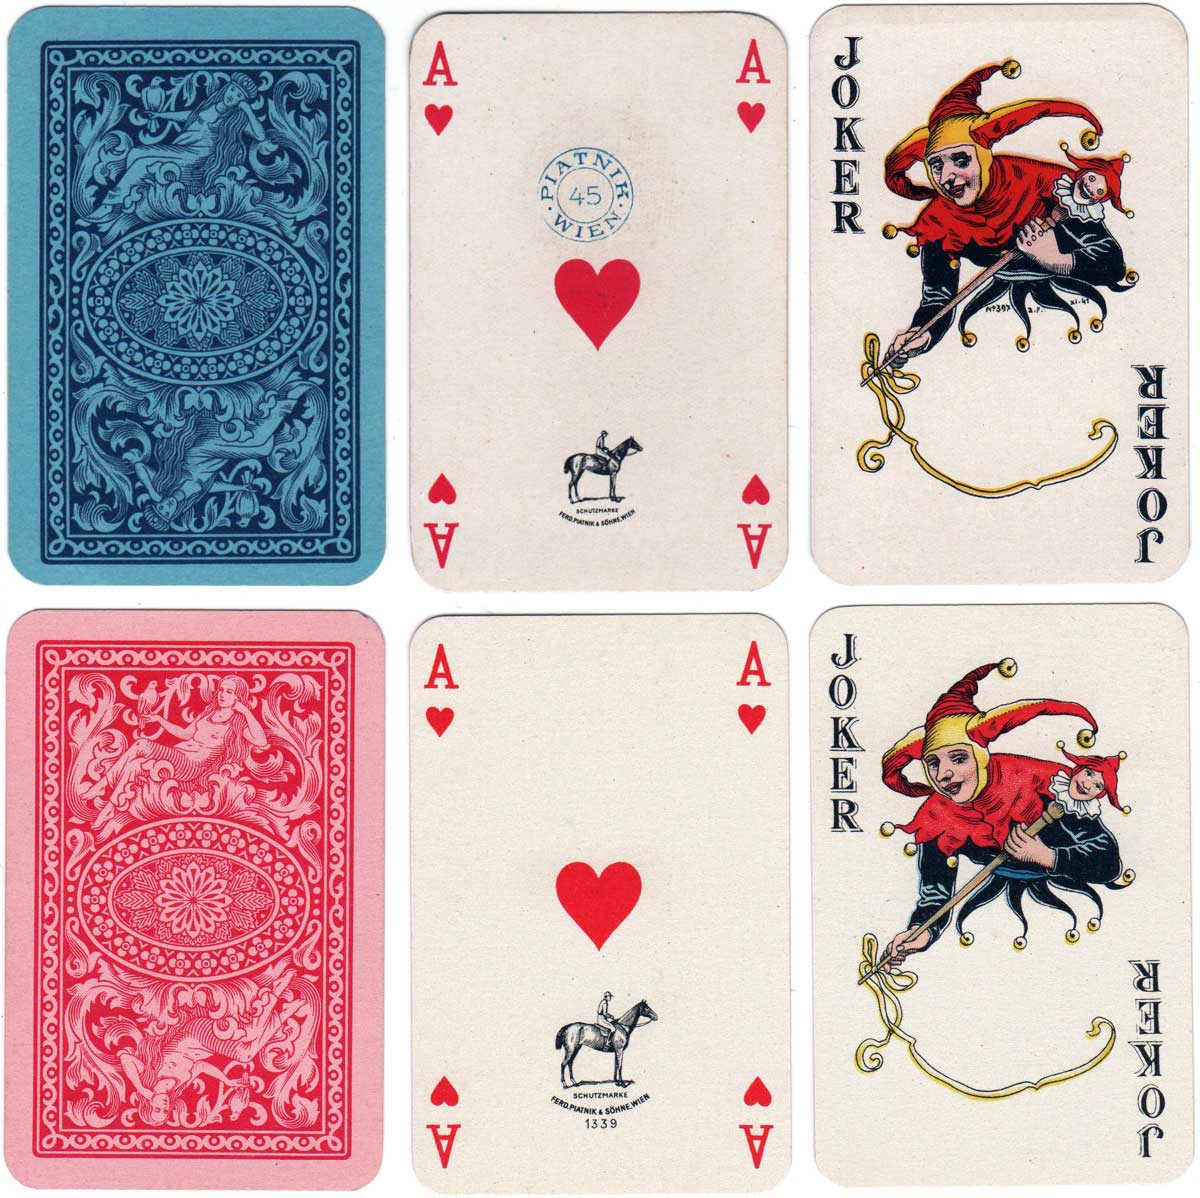 Non-standard French-suited cards published by Ferd Piatnik & Sõhne, Vienna, c.1940